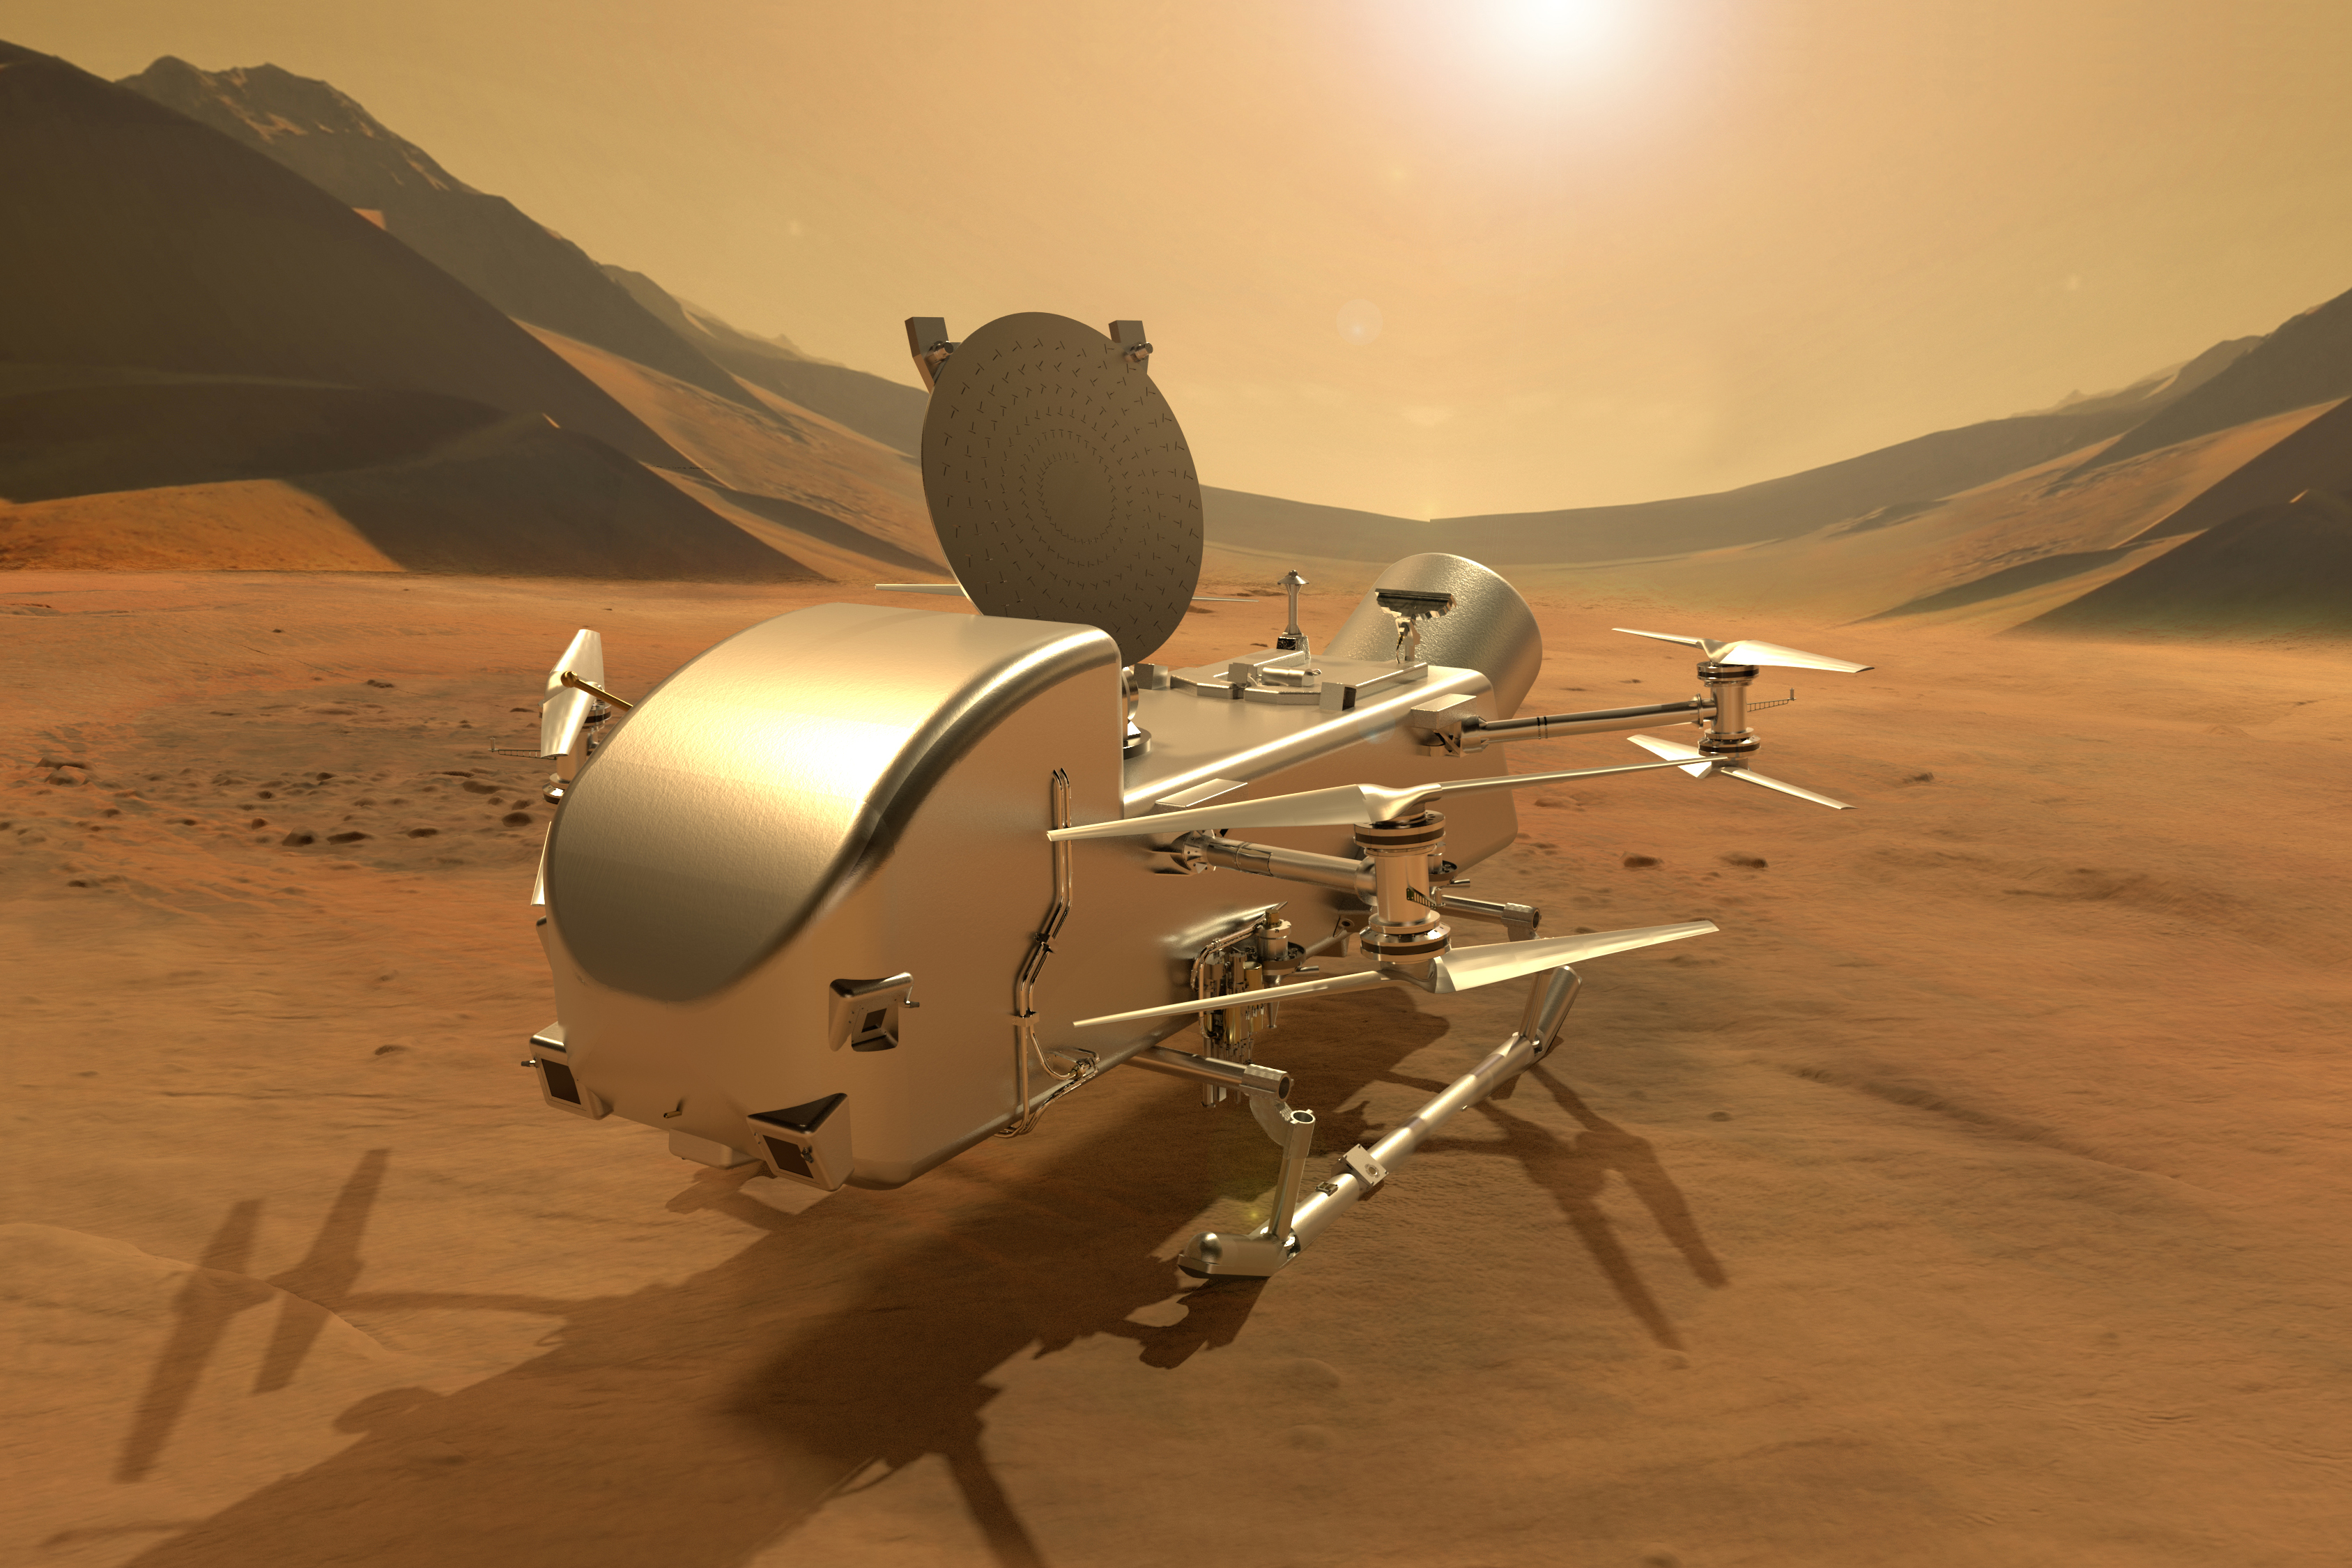 A silver drone-like rotorcraft sits on the sandy, tan surface of a planet, with shaded mountains and a hazy sky and Sun in the background